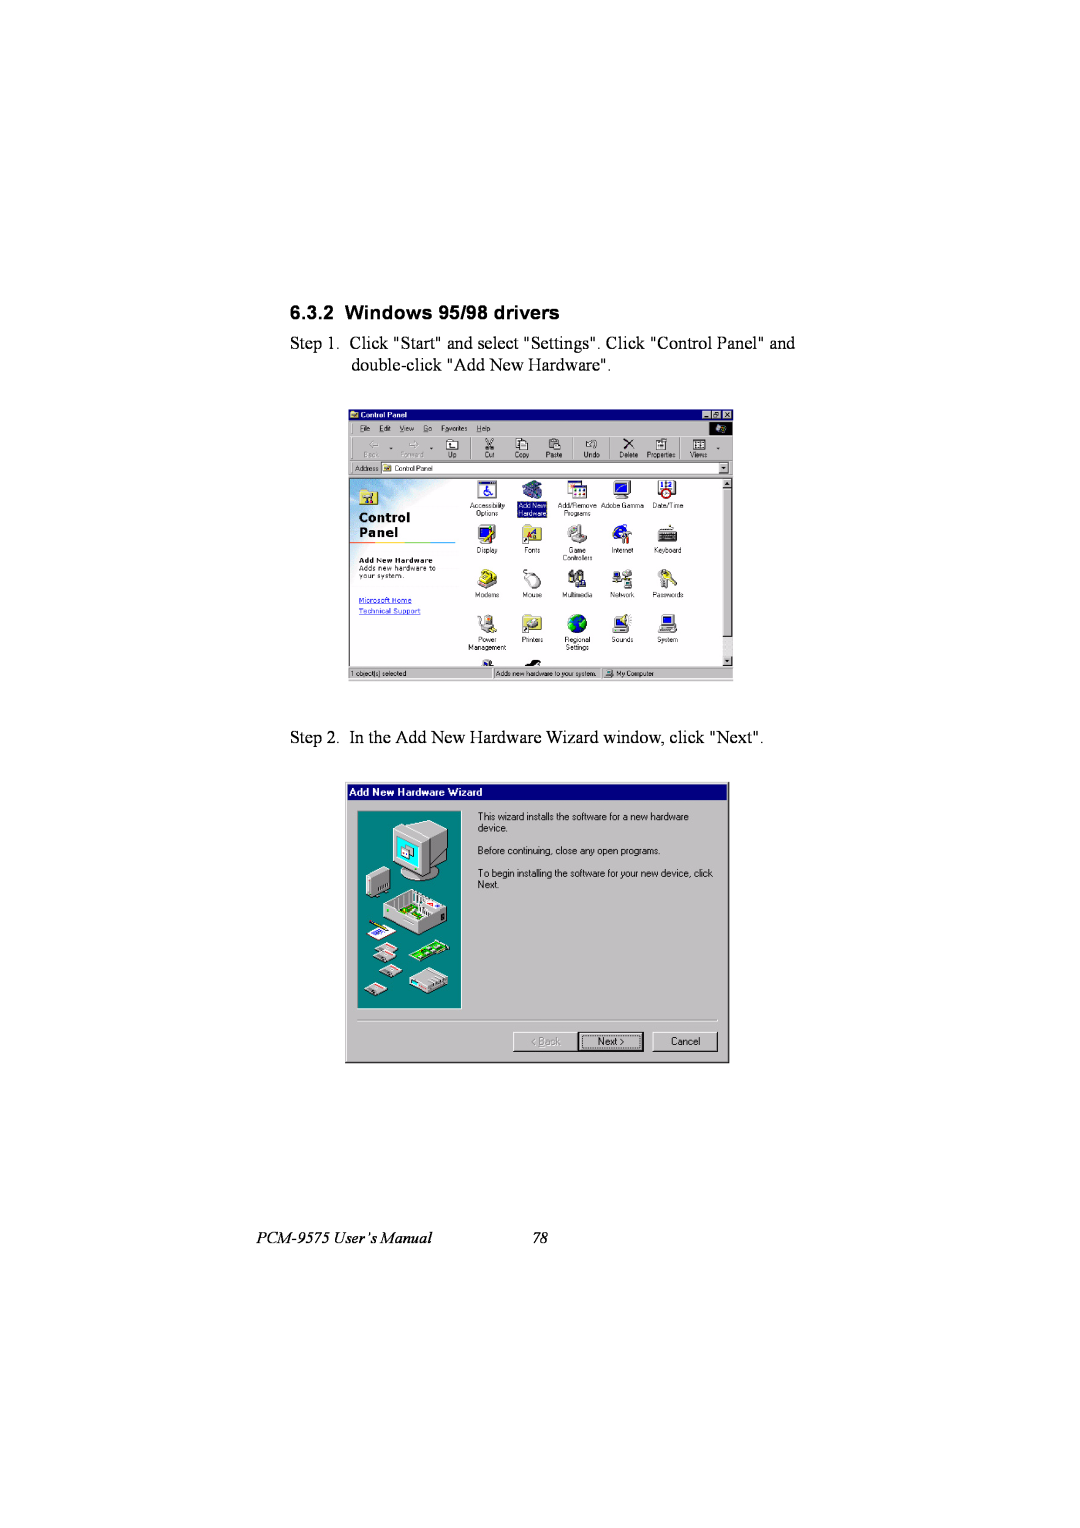 IBM 100/10 user manual Windows 95/98 drivers, In the Add New Hardware Wizard window, click Next, PCM-9575 User’s Manual 